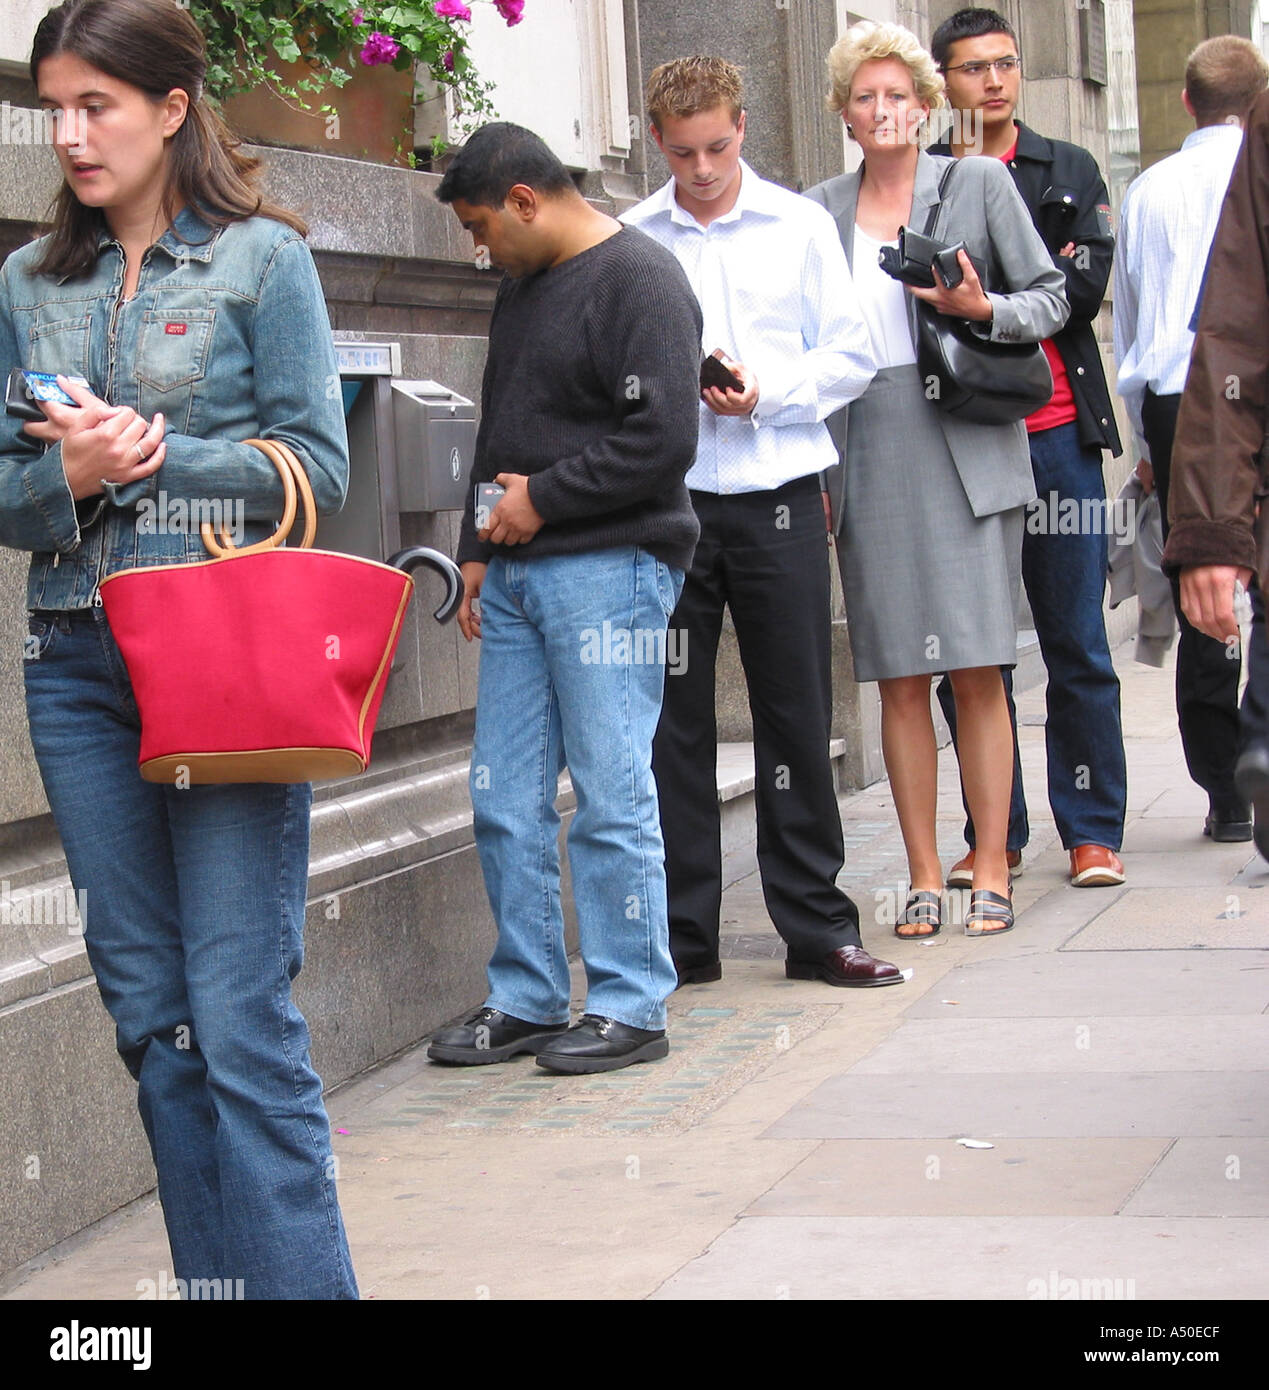 Queue of People at a Cash ATM Machine Stock Photo